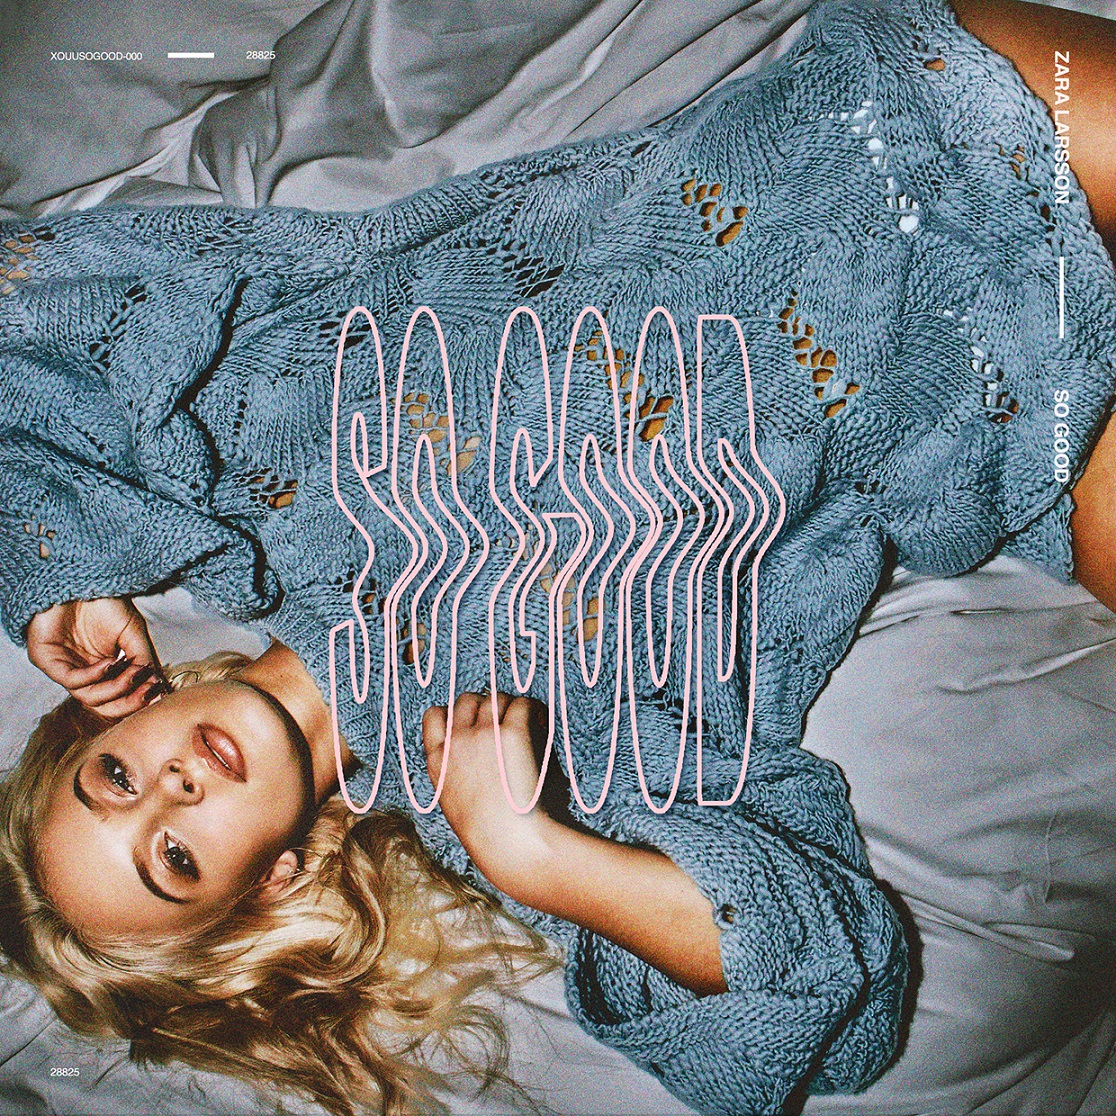 Zara Larsson Porn - CD: Zara Larsson - So Good review - 'Fast food McSex with Larsson as the  main dish'